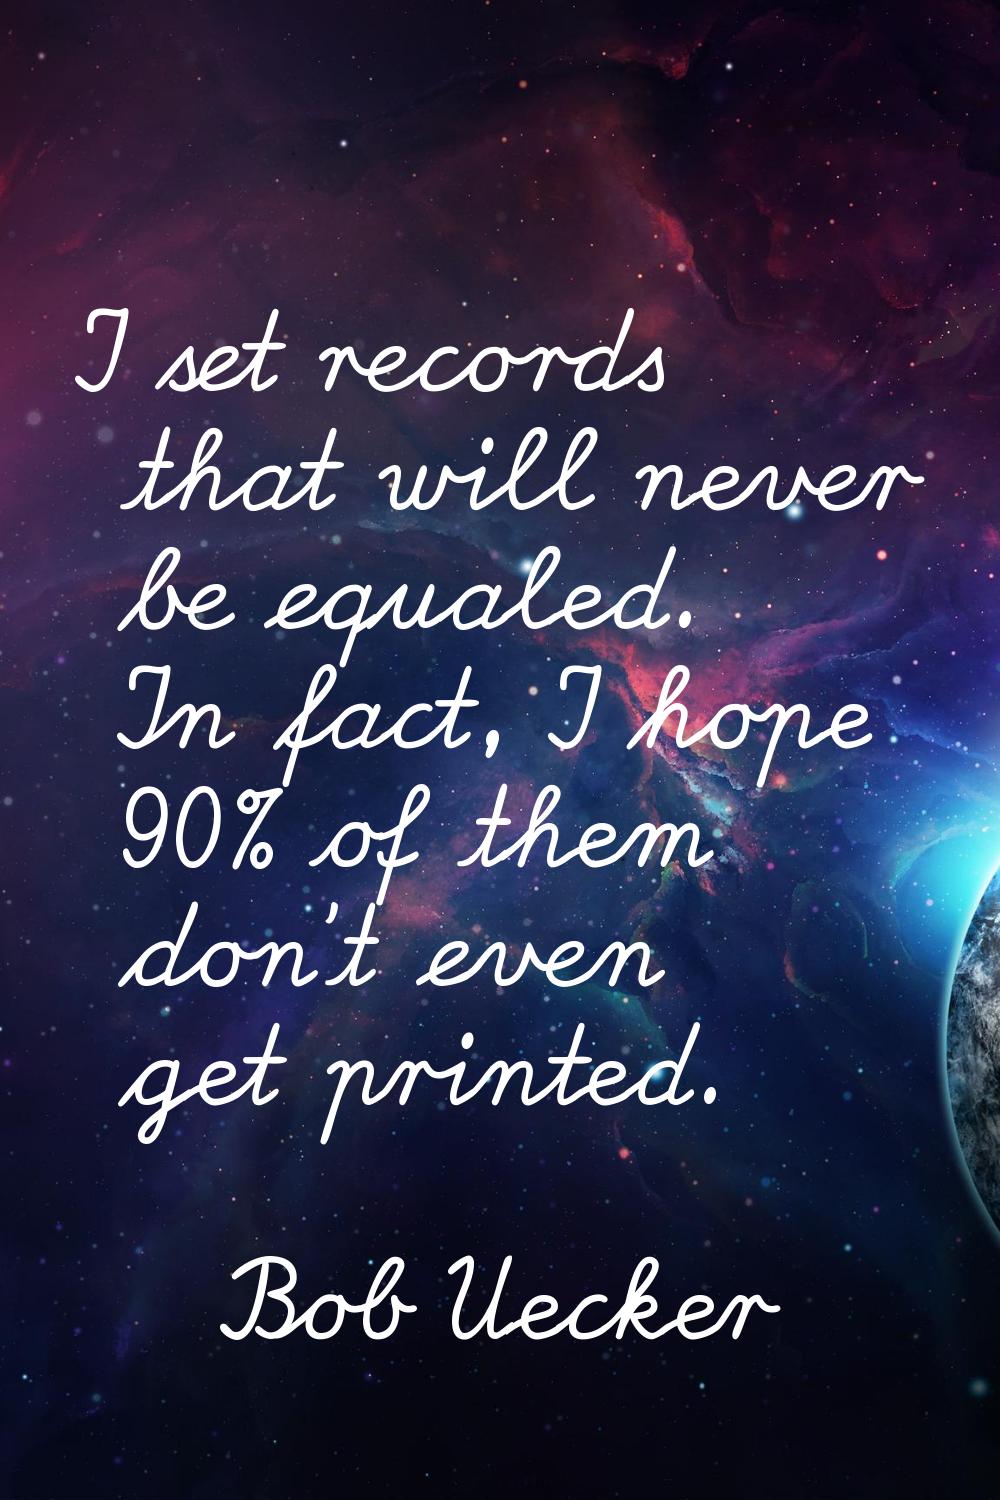 I set records that will never be equaled. In fact, I hope 90% of them don't even get printed.